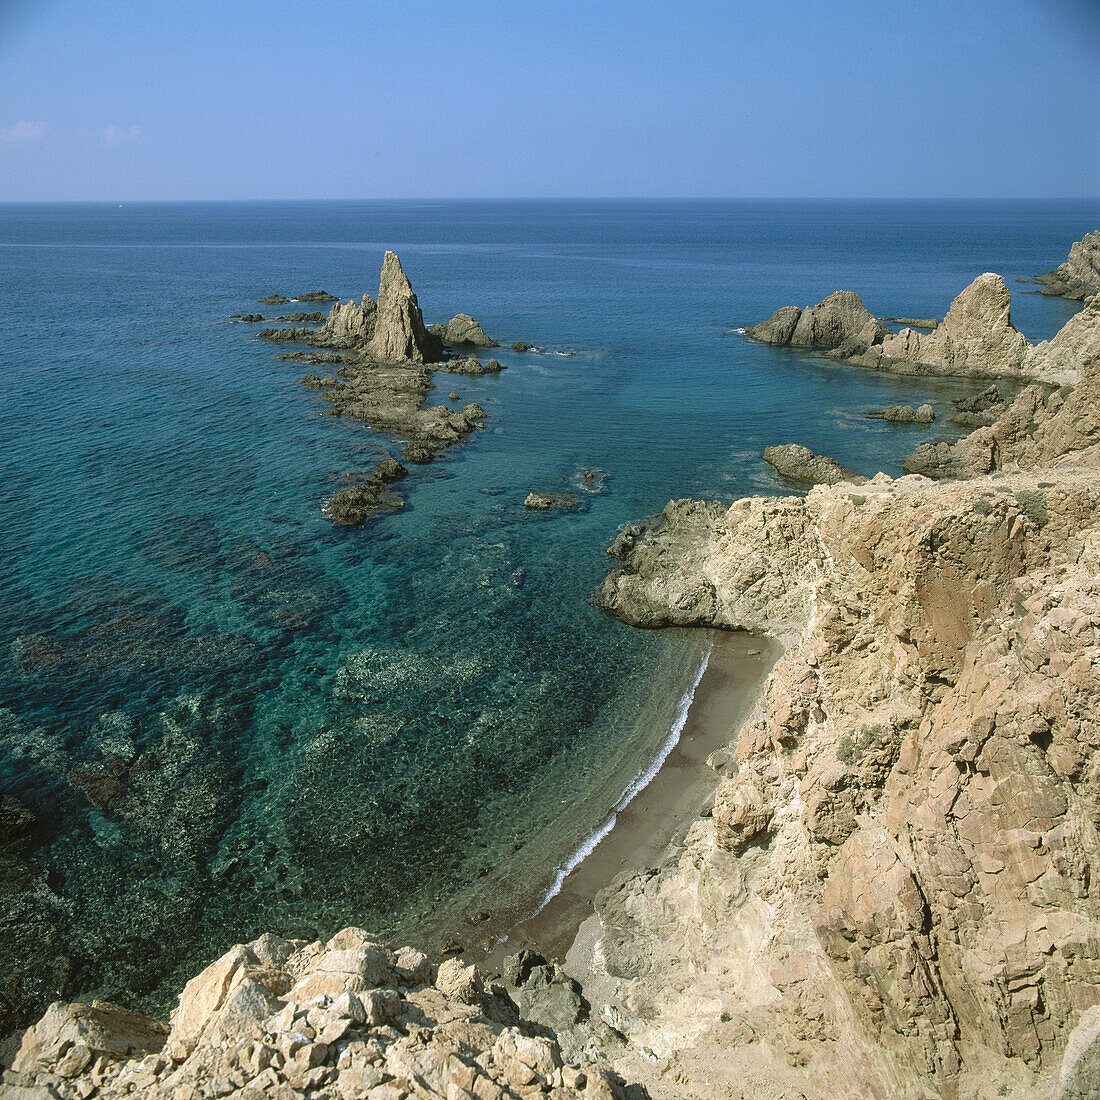 Reef of the Mermaids, Cabo de Gata-Níjar Natural Park. Almería province, Andalusia. Spain